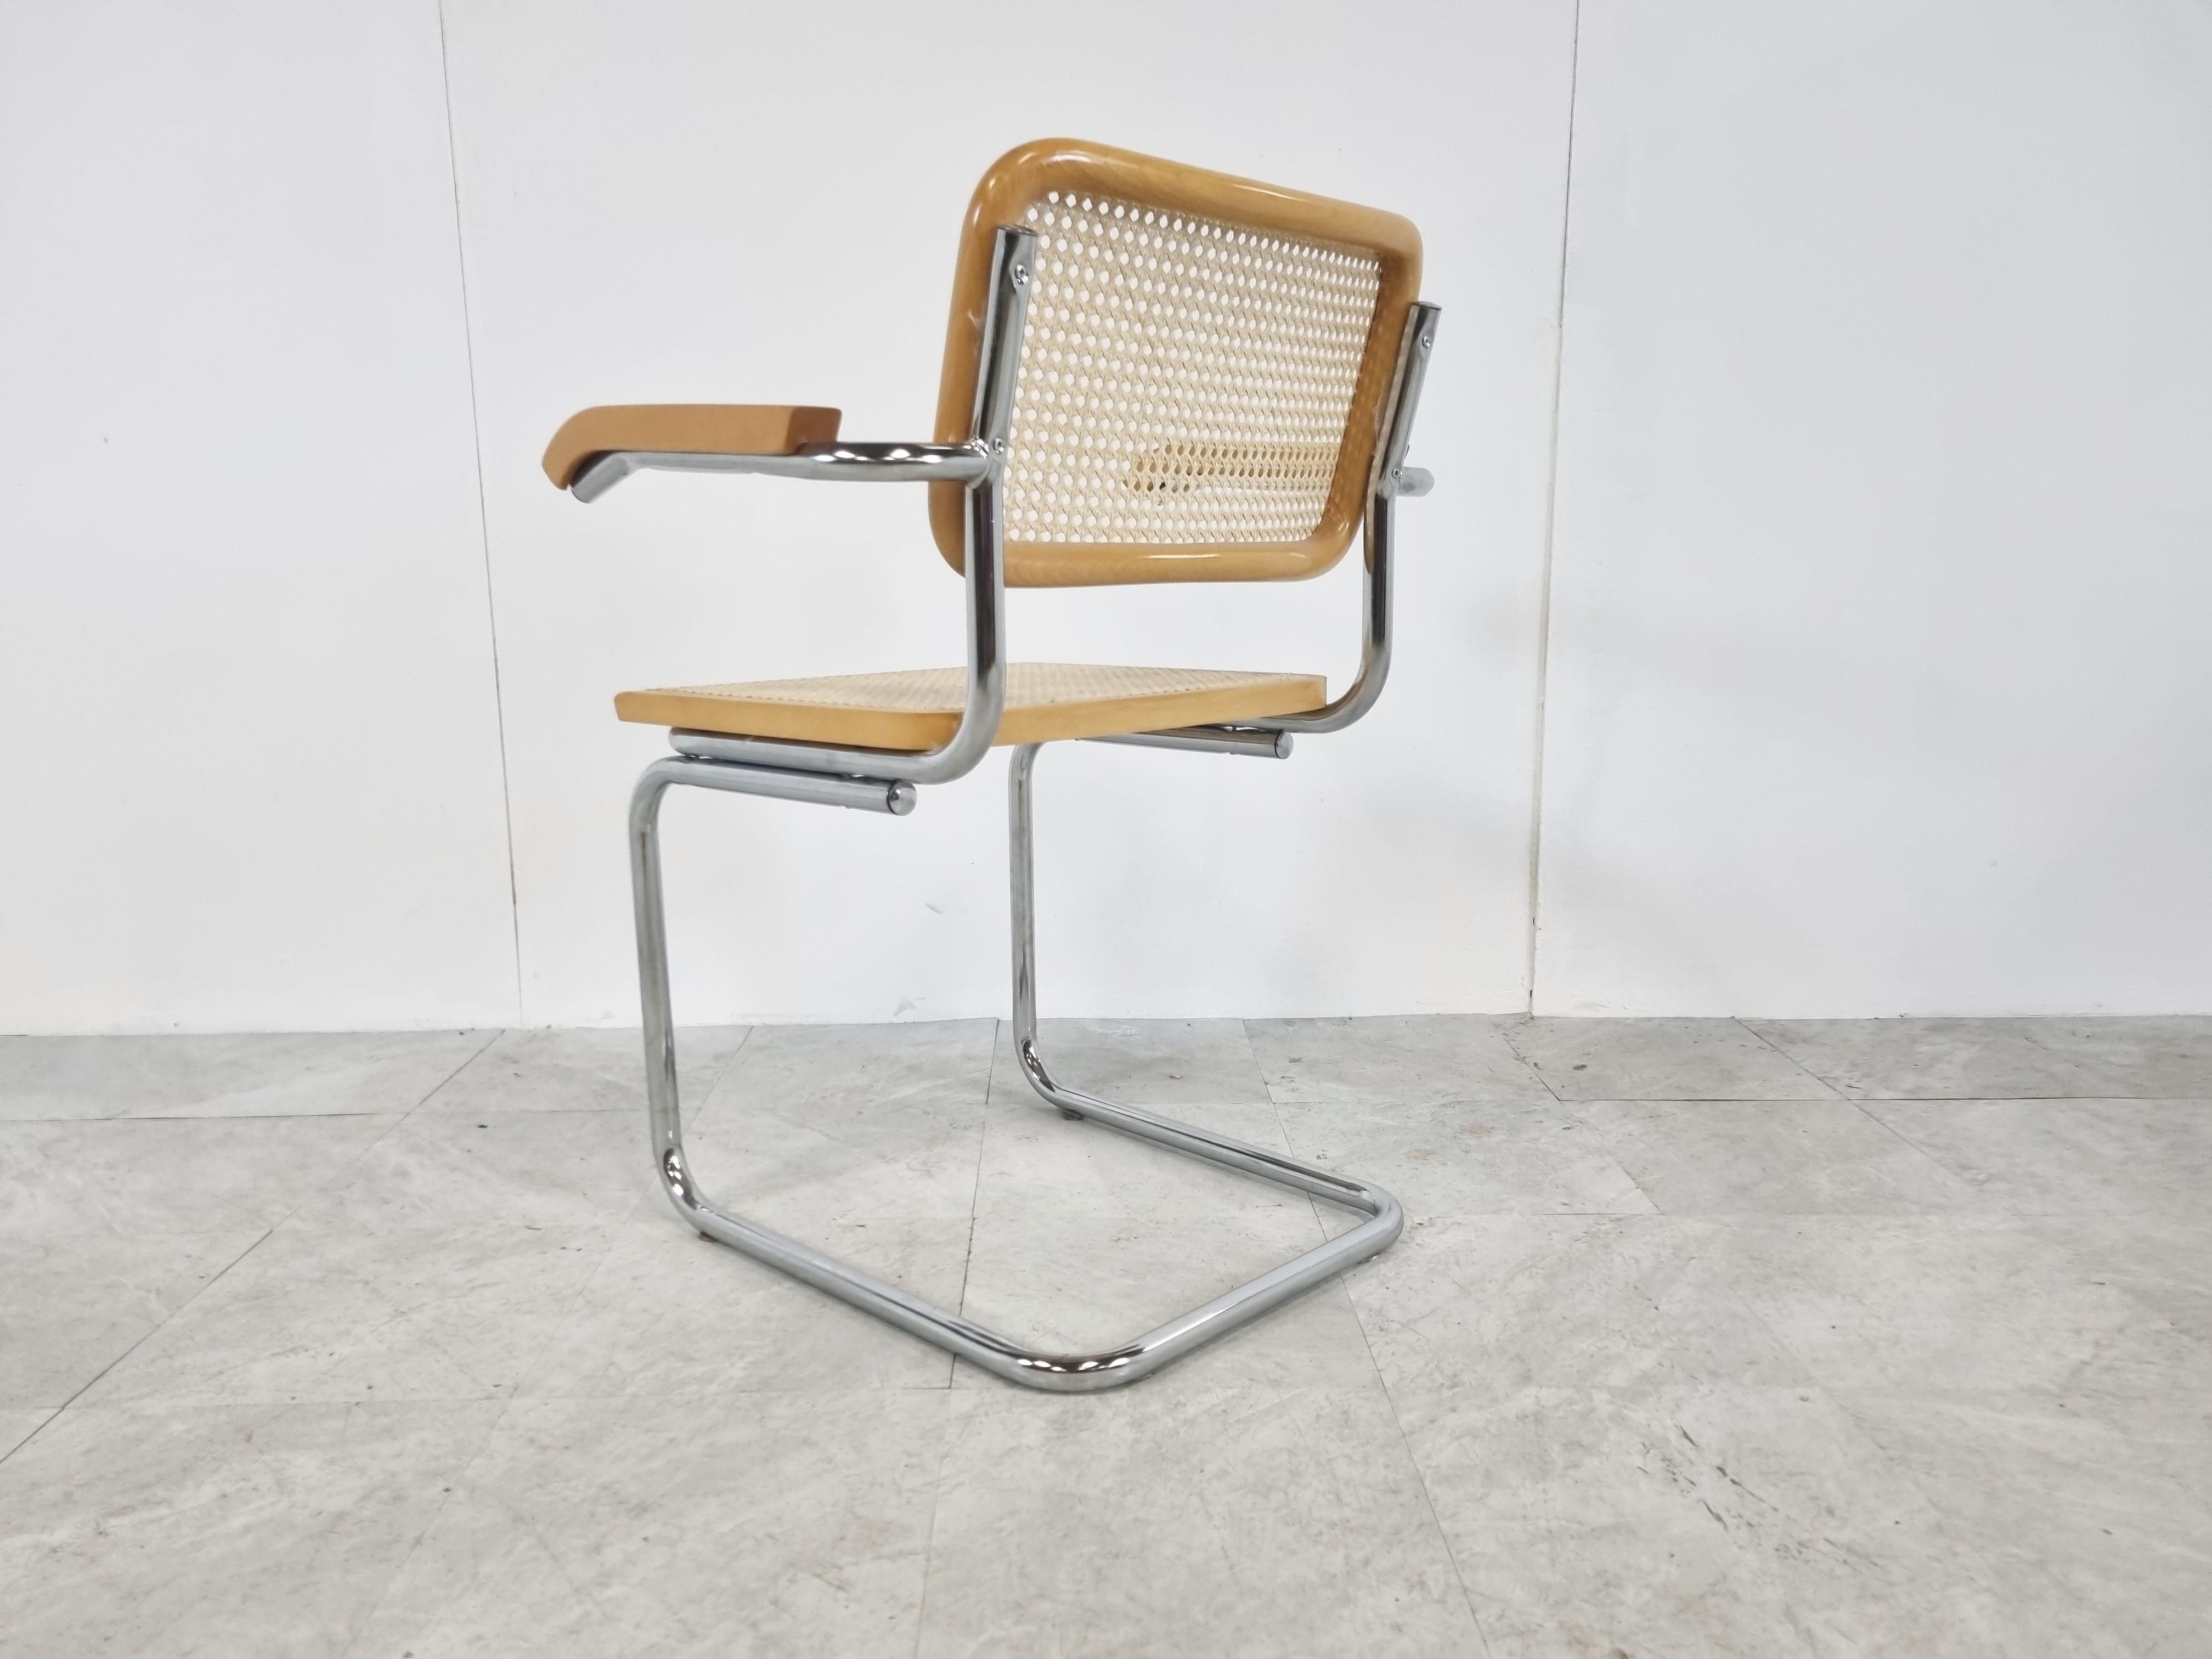 Late 20th Century Marcel Breuer Style Armchair, Made in Italy, 1970s